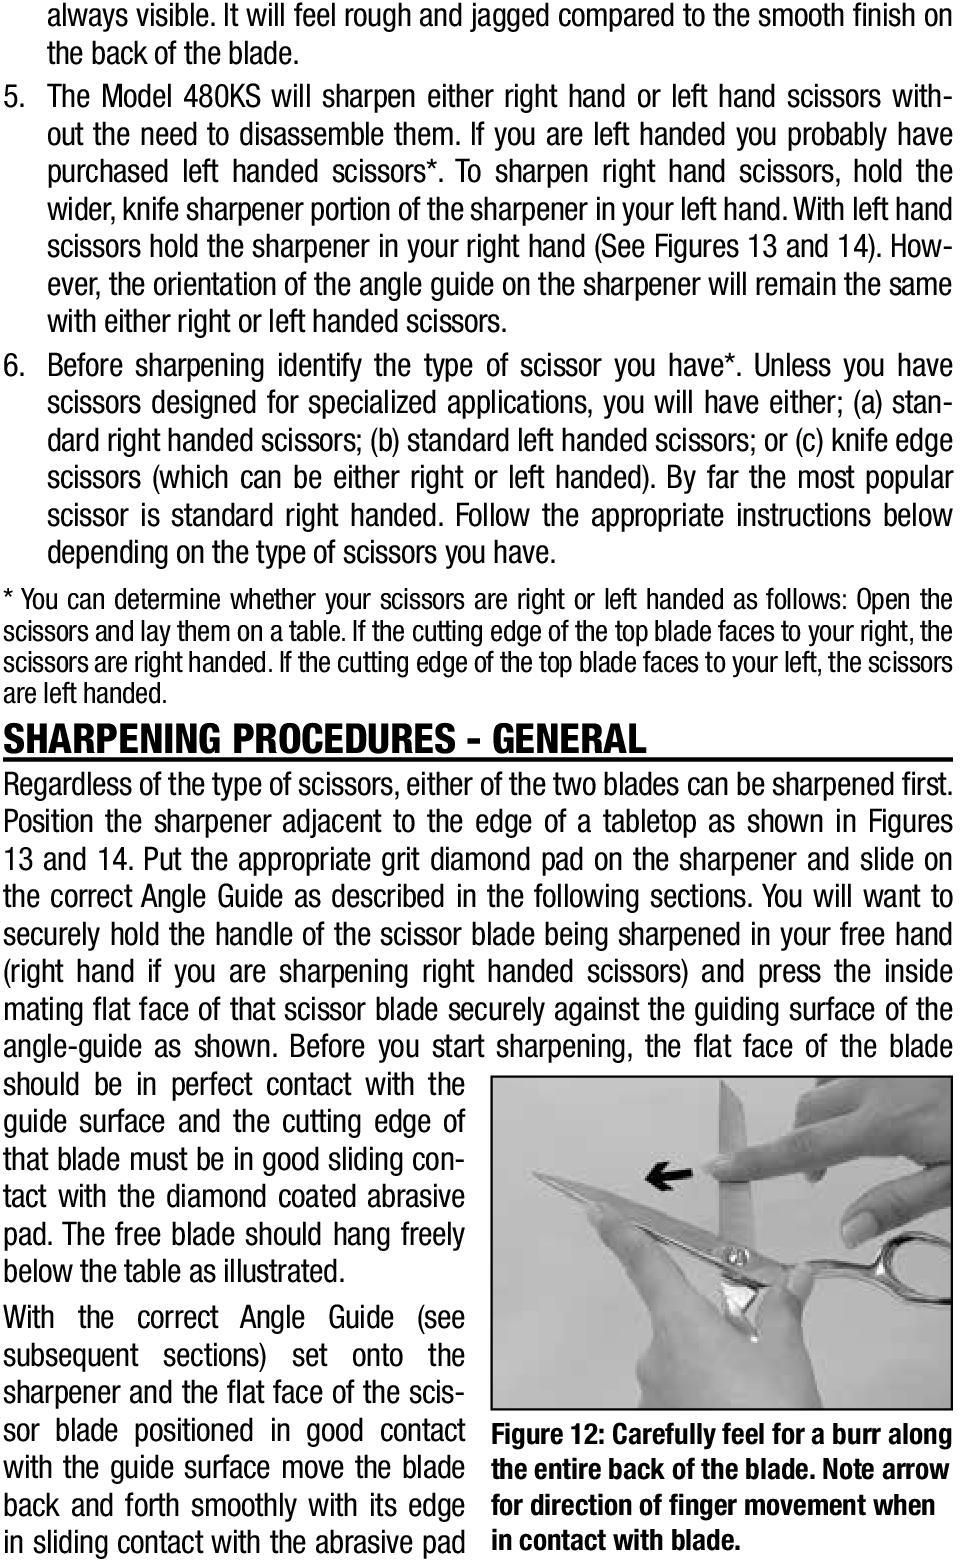 To sharpen right hand scissors, hold the wider, knife sharpener portion of the sharpener in your left hand. With left hand scissors hold the sharpener in your right hand (See Figures 13 and 14).